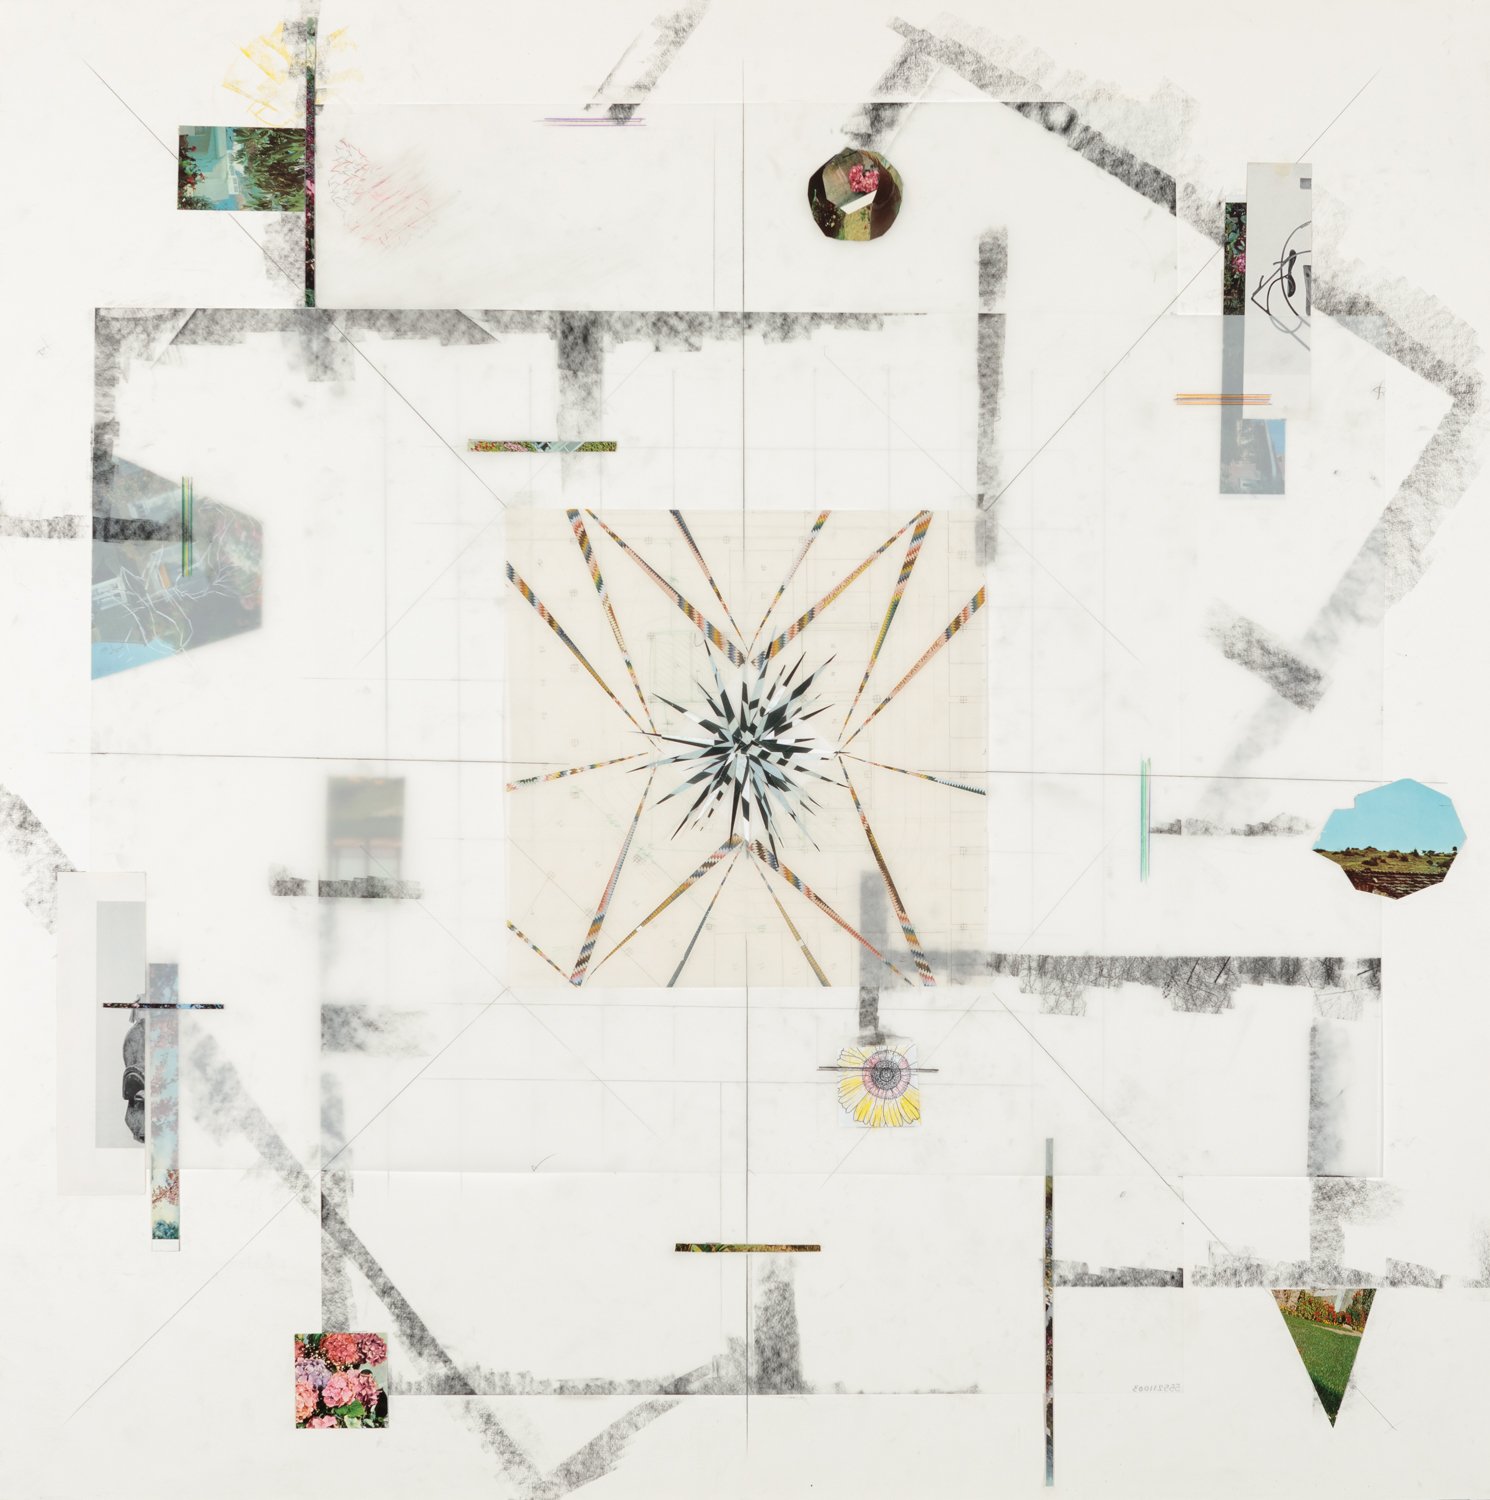  Untitled, 2021, graphite, colored pencil and collage on paper and mylar, 42 x 42 inches/ 107 x 107 cm 